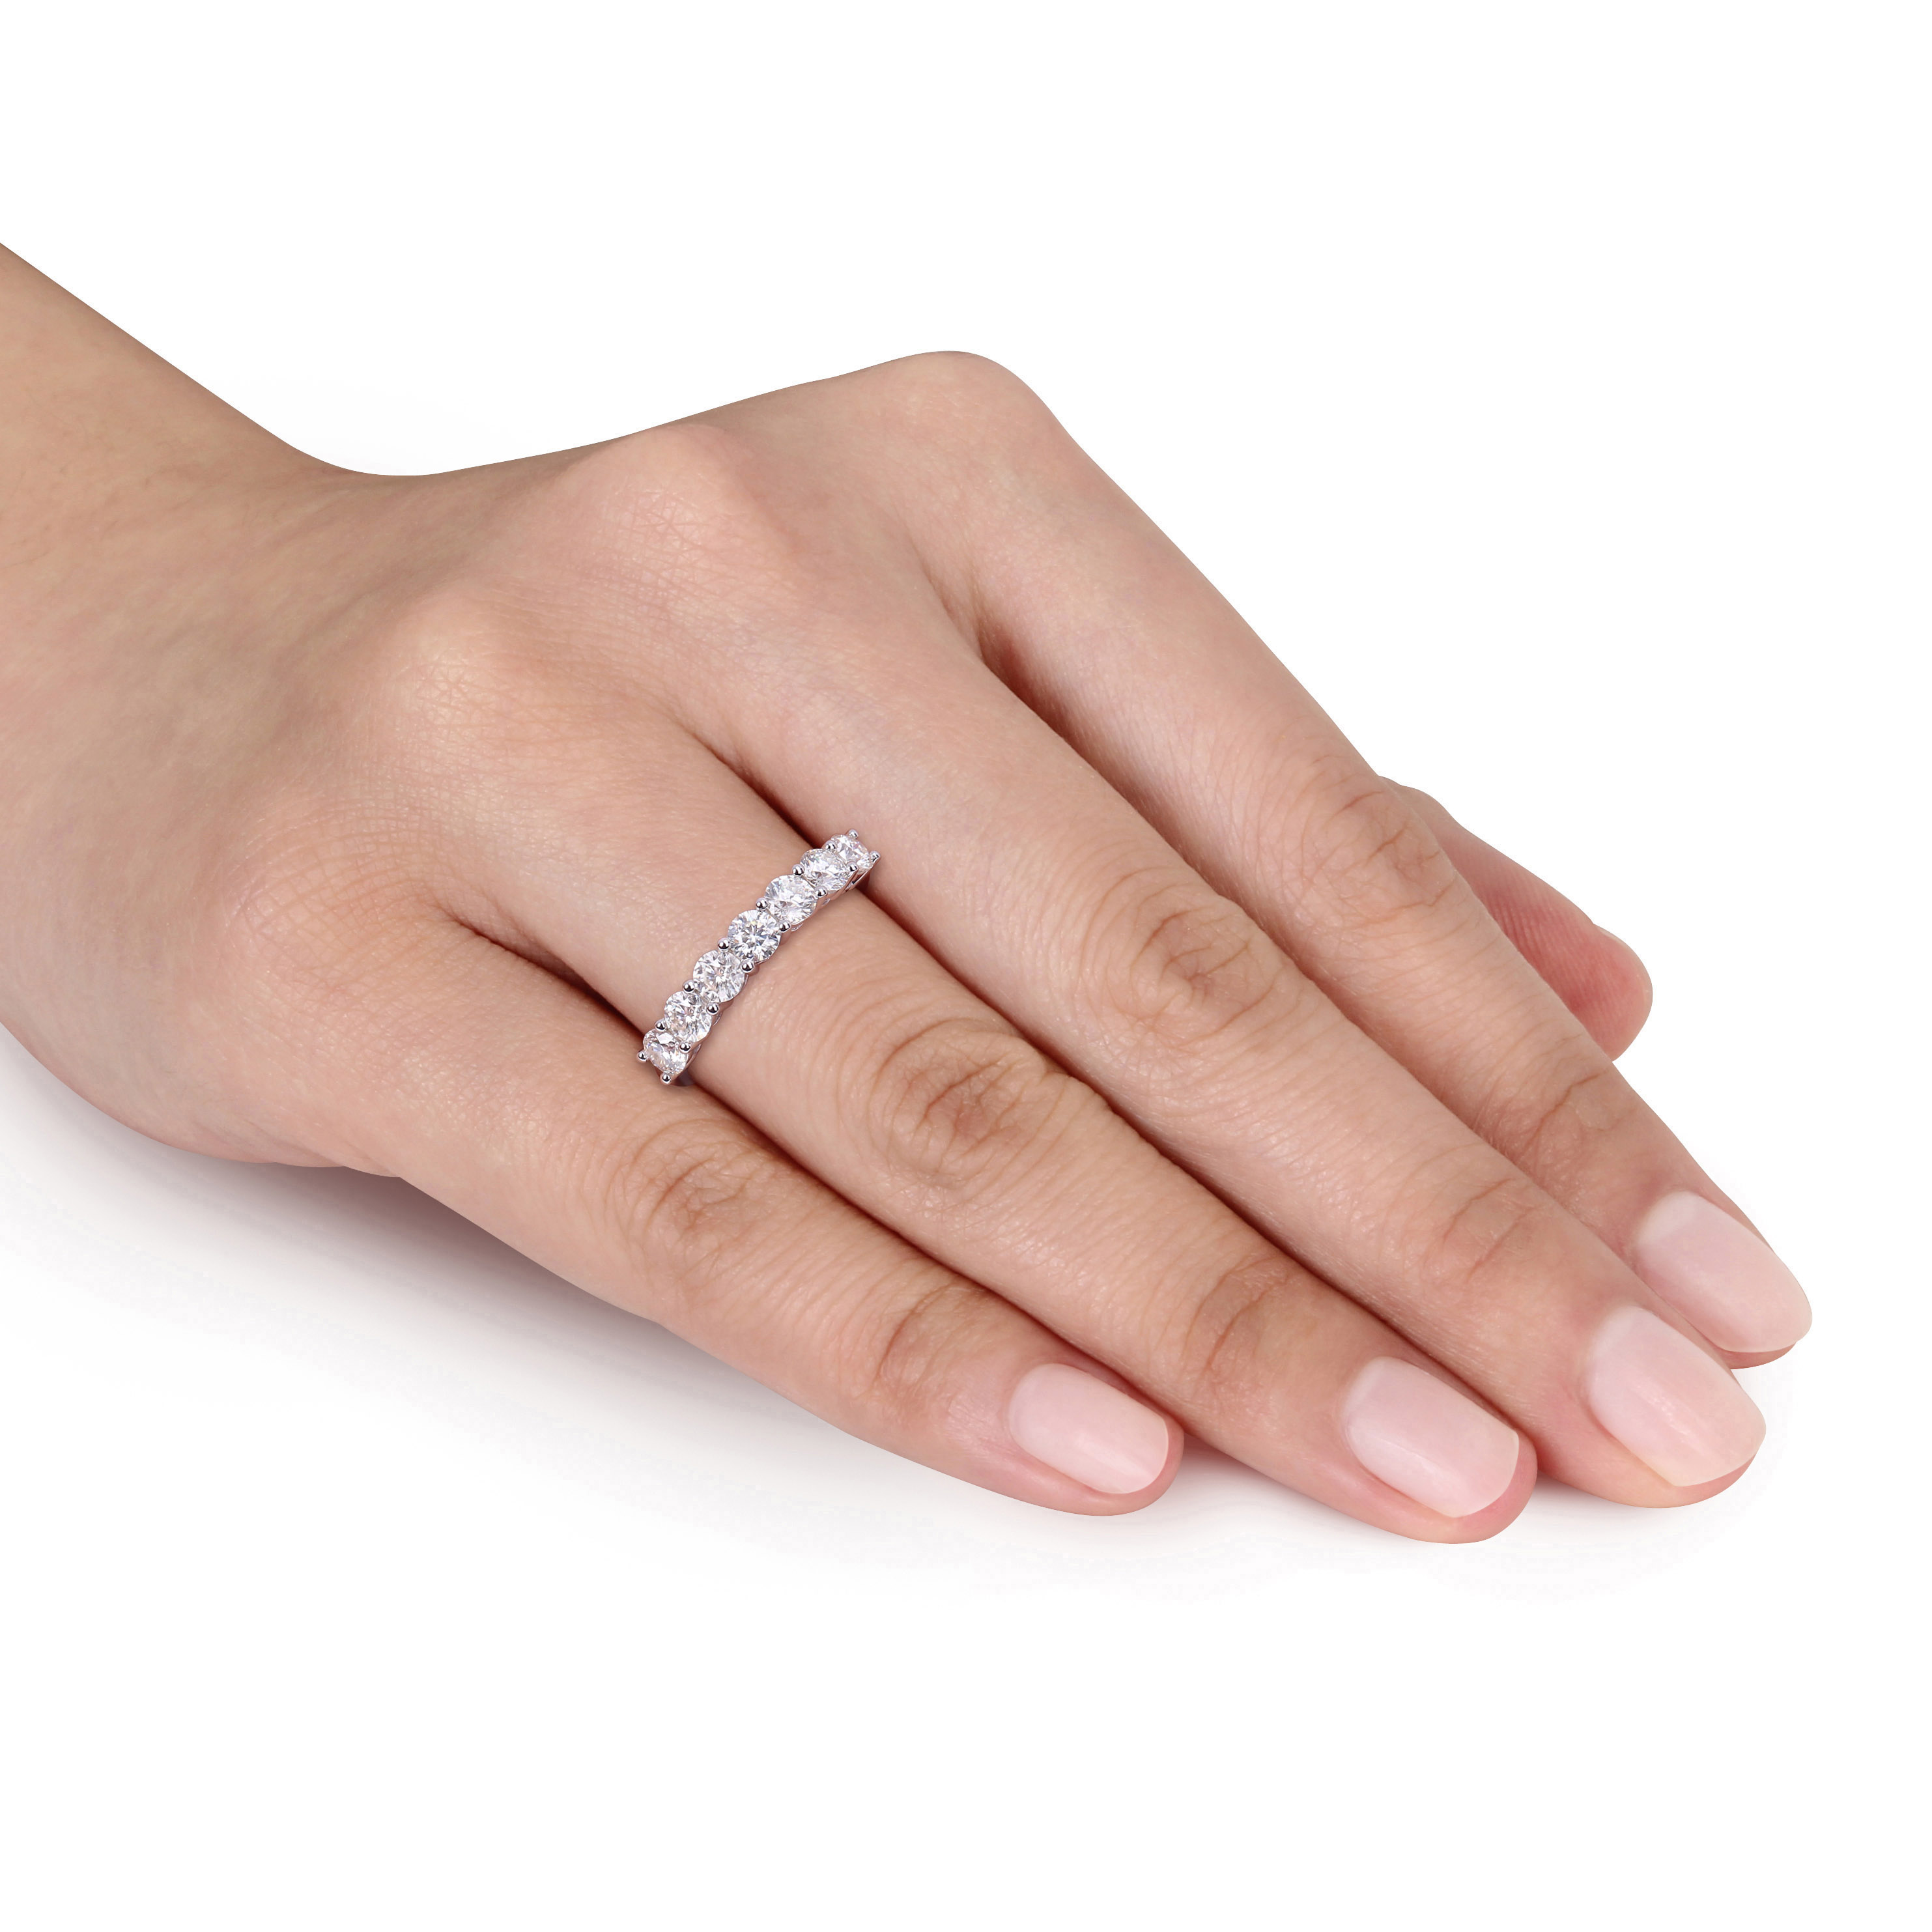 1 CT DEW Created Moissanite Anniversary Band in Sterling Silver